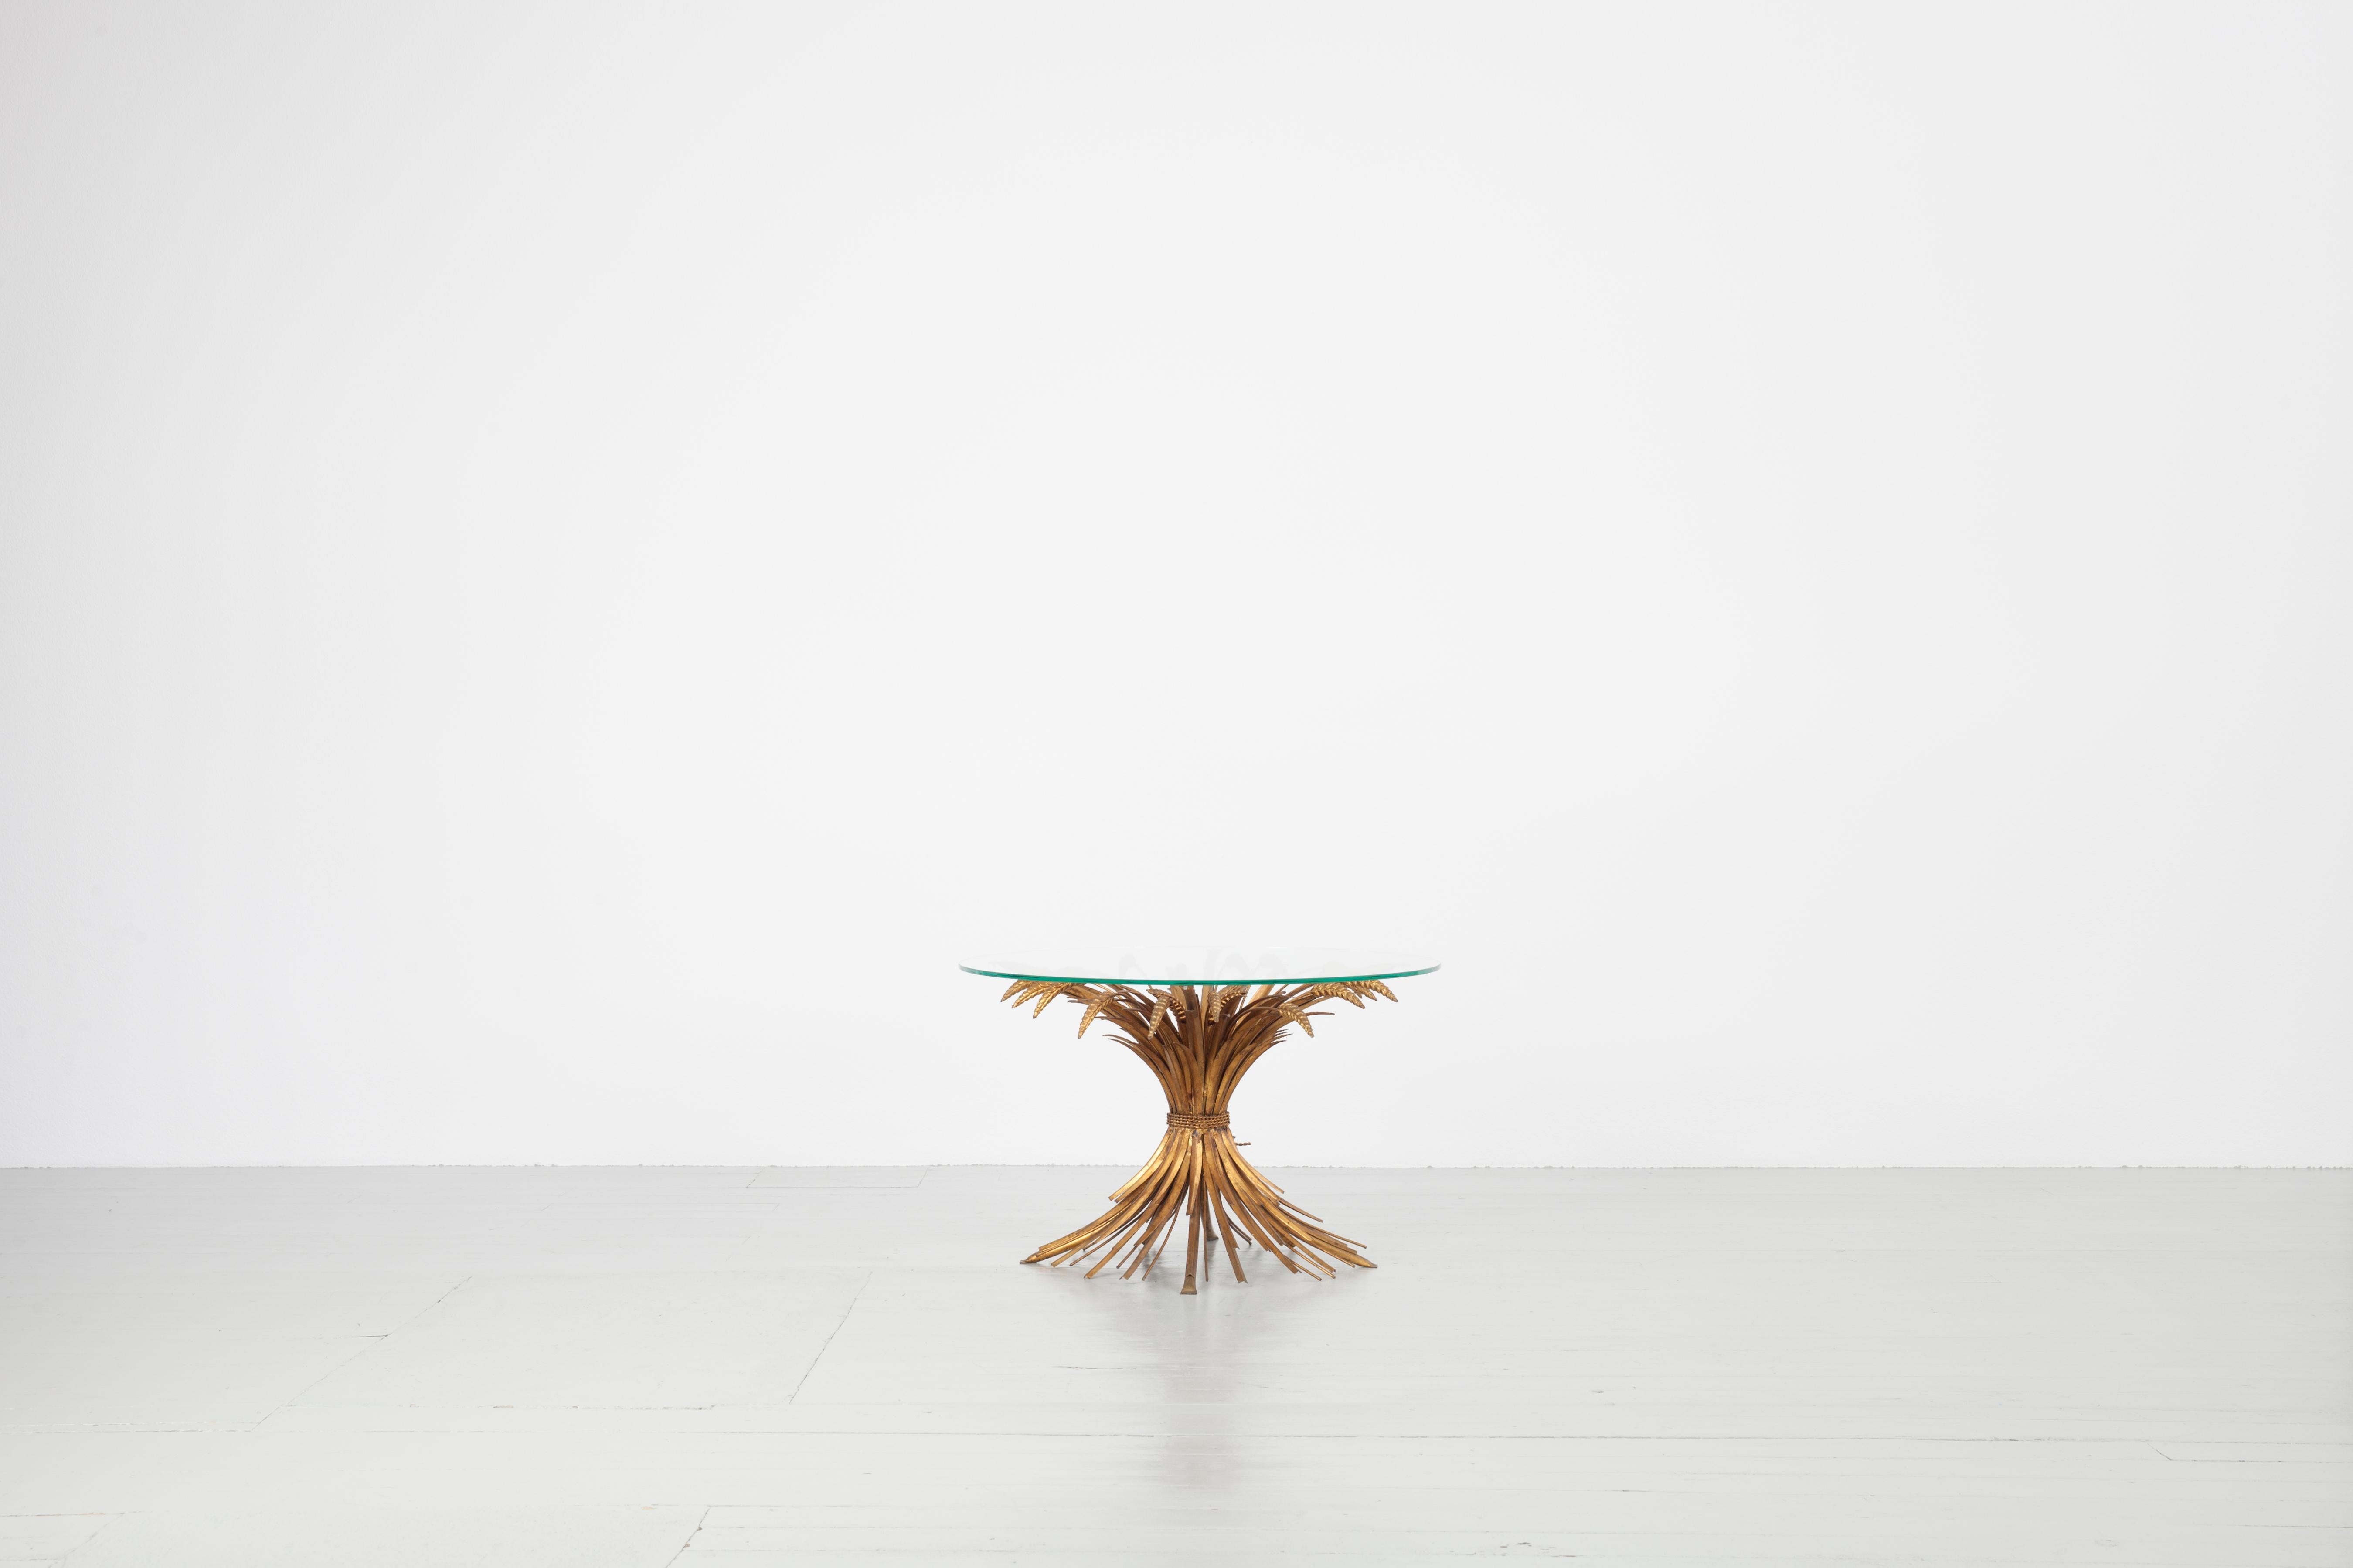 Wheat Sheaf table, France, 1960s. This unique design is closely associated with Coco Chanel and her apartment in the Rue Cambon, Paris. Salvador Dali is said to have given Coco Chanel the table as a gift. The base and frame are made of a gilded